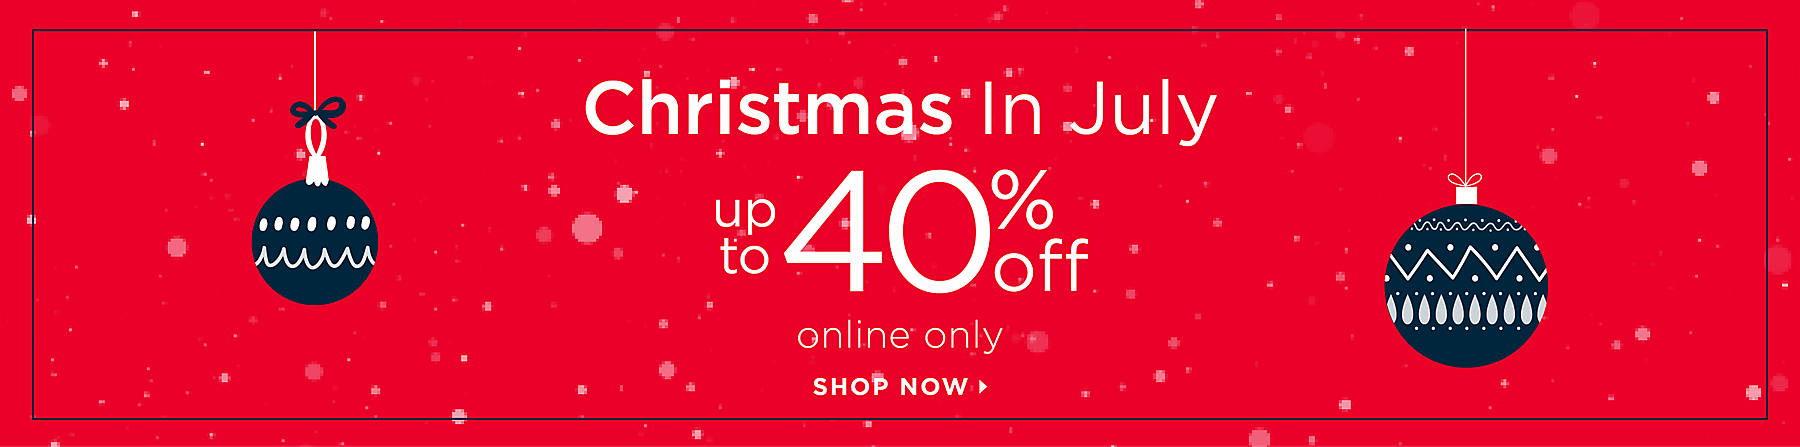 Christmas In July Up to 40% Off Online Only Shop Now